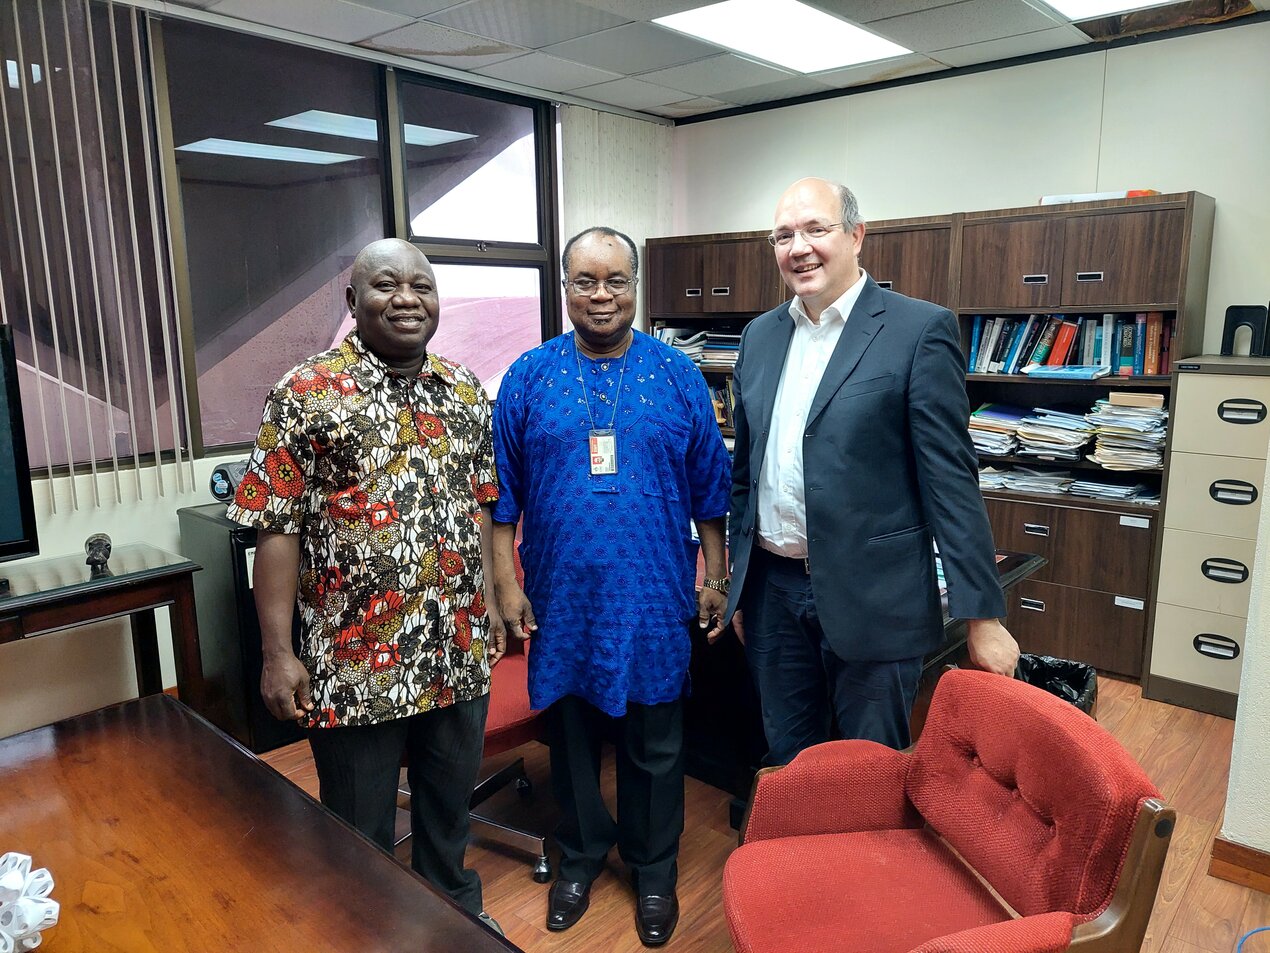 Meeting with the Dean Prof. Dr. Edwin Ekwue and Head of Department Dr. Festus Olutogue